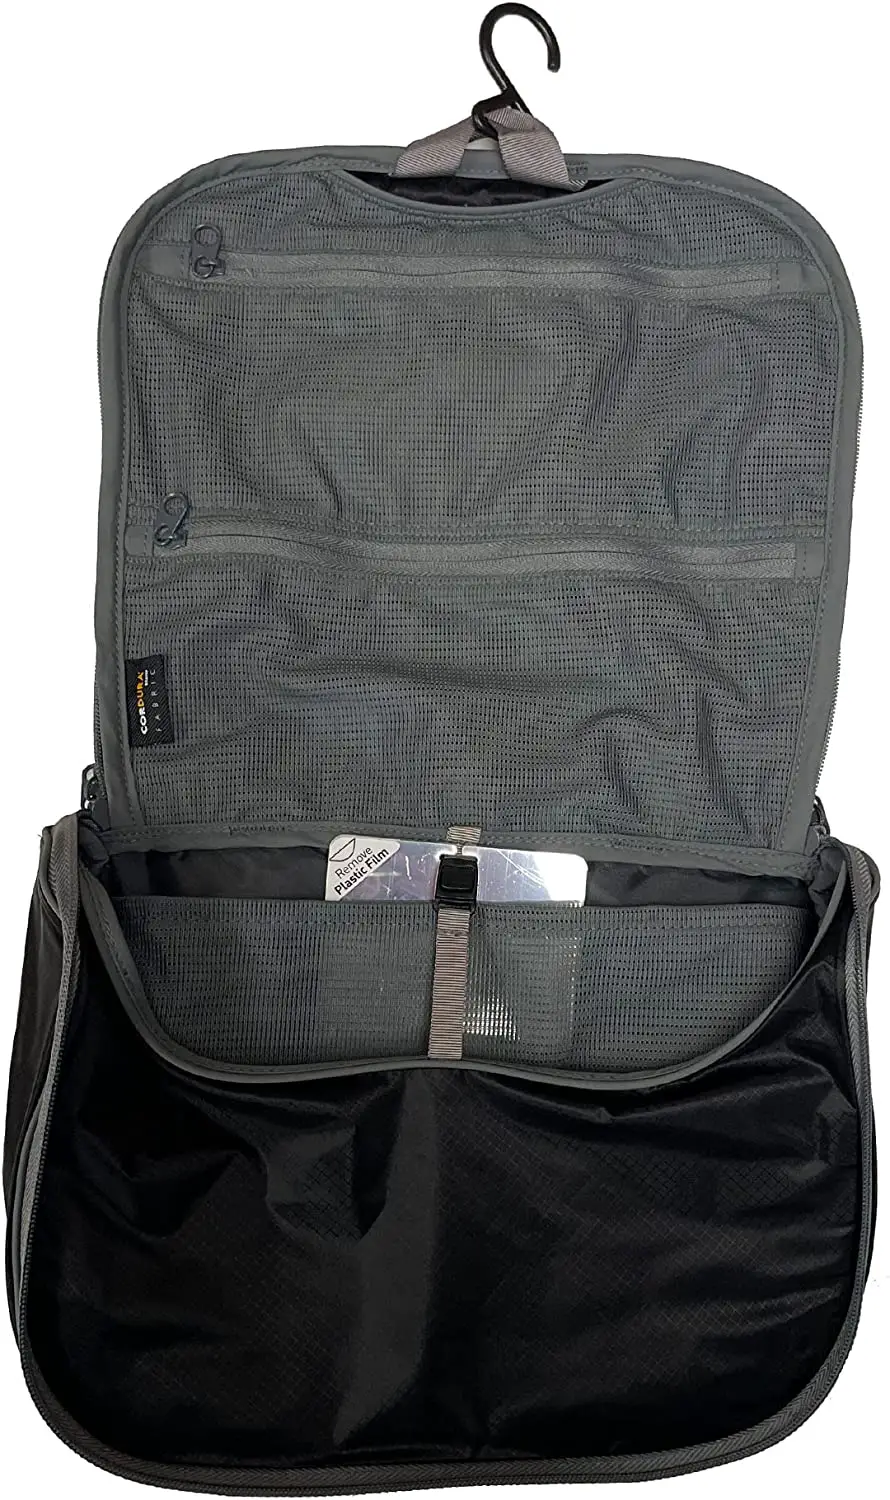 Sea to Summit Traveling Light Hanging Toiletry Bag